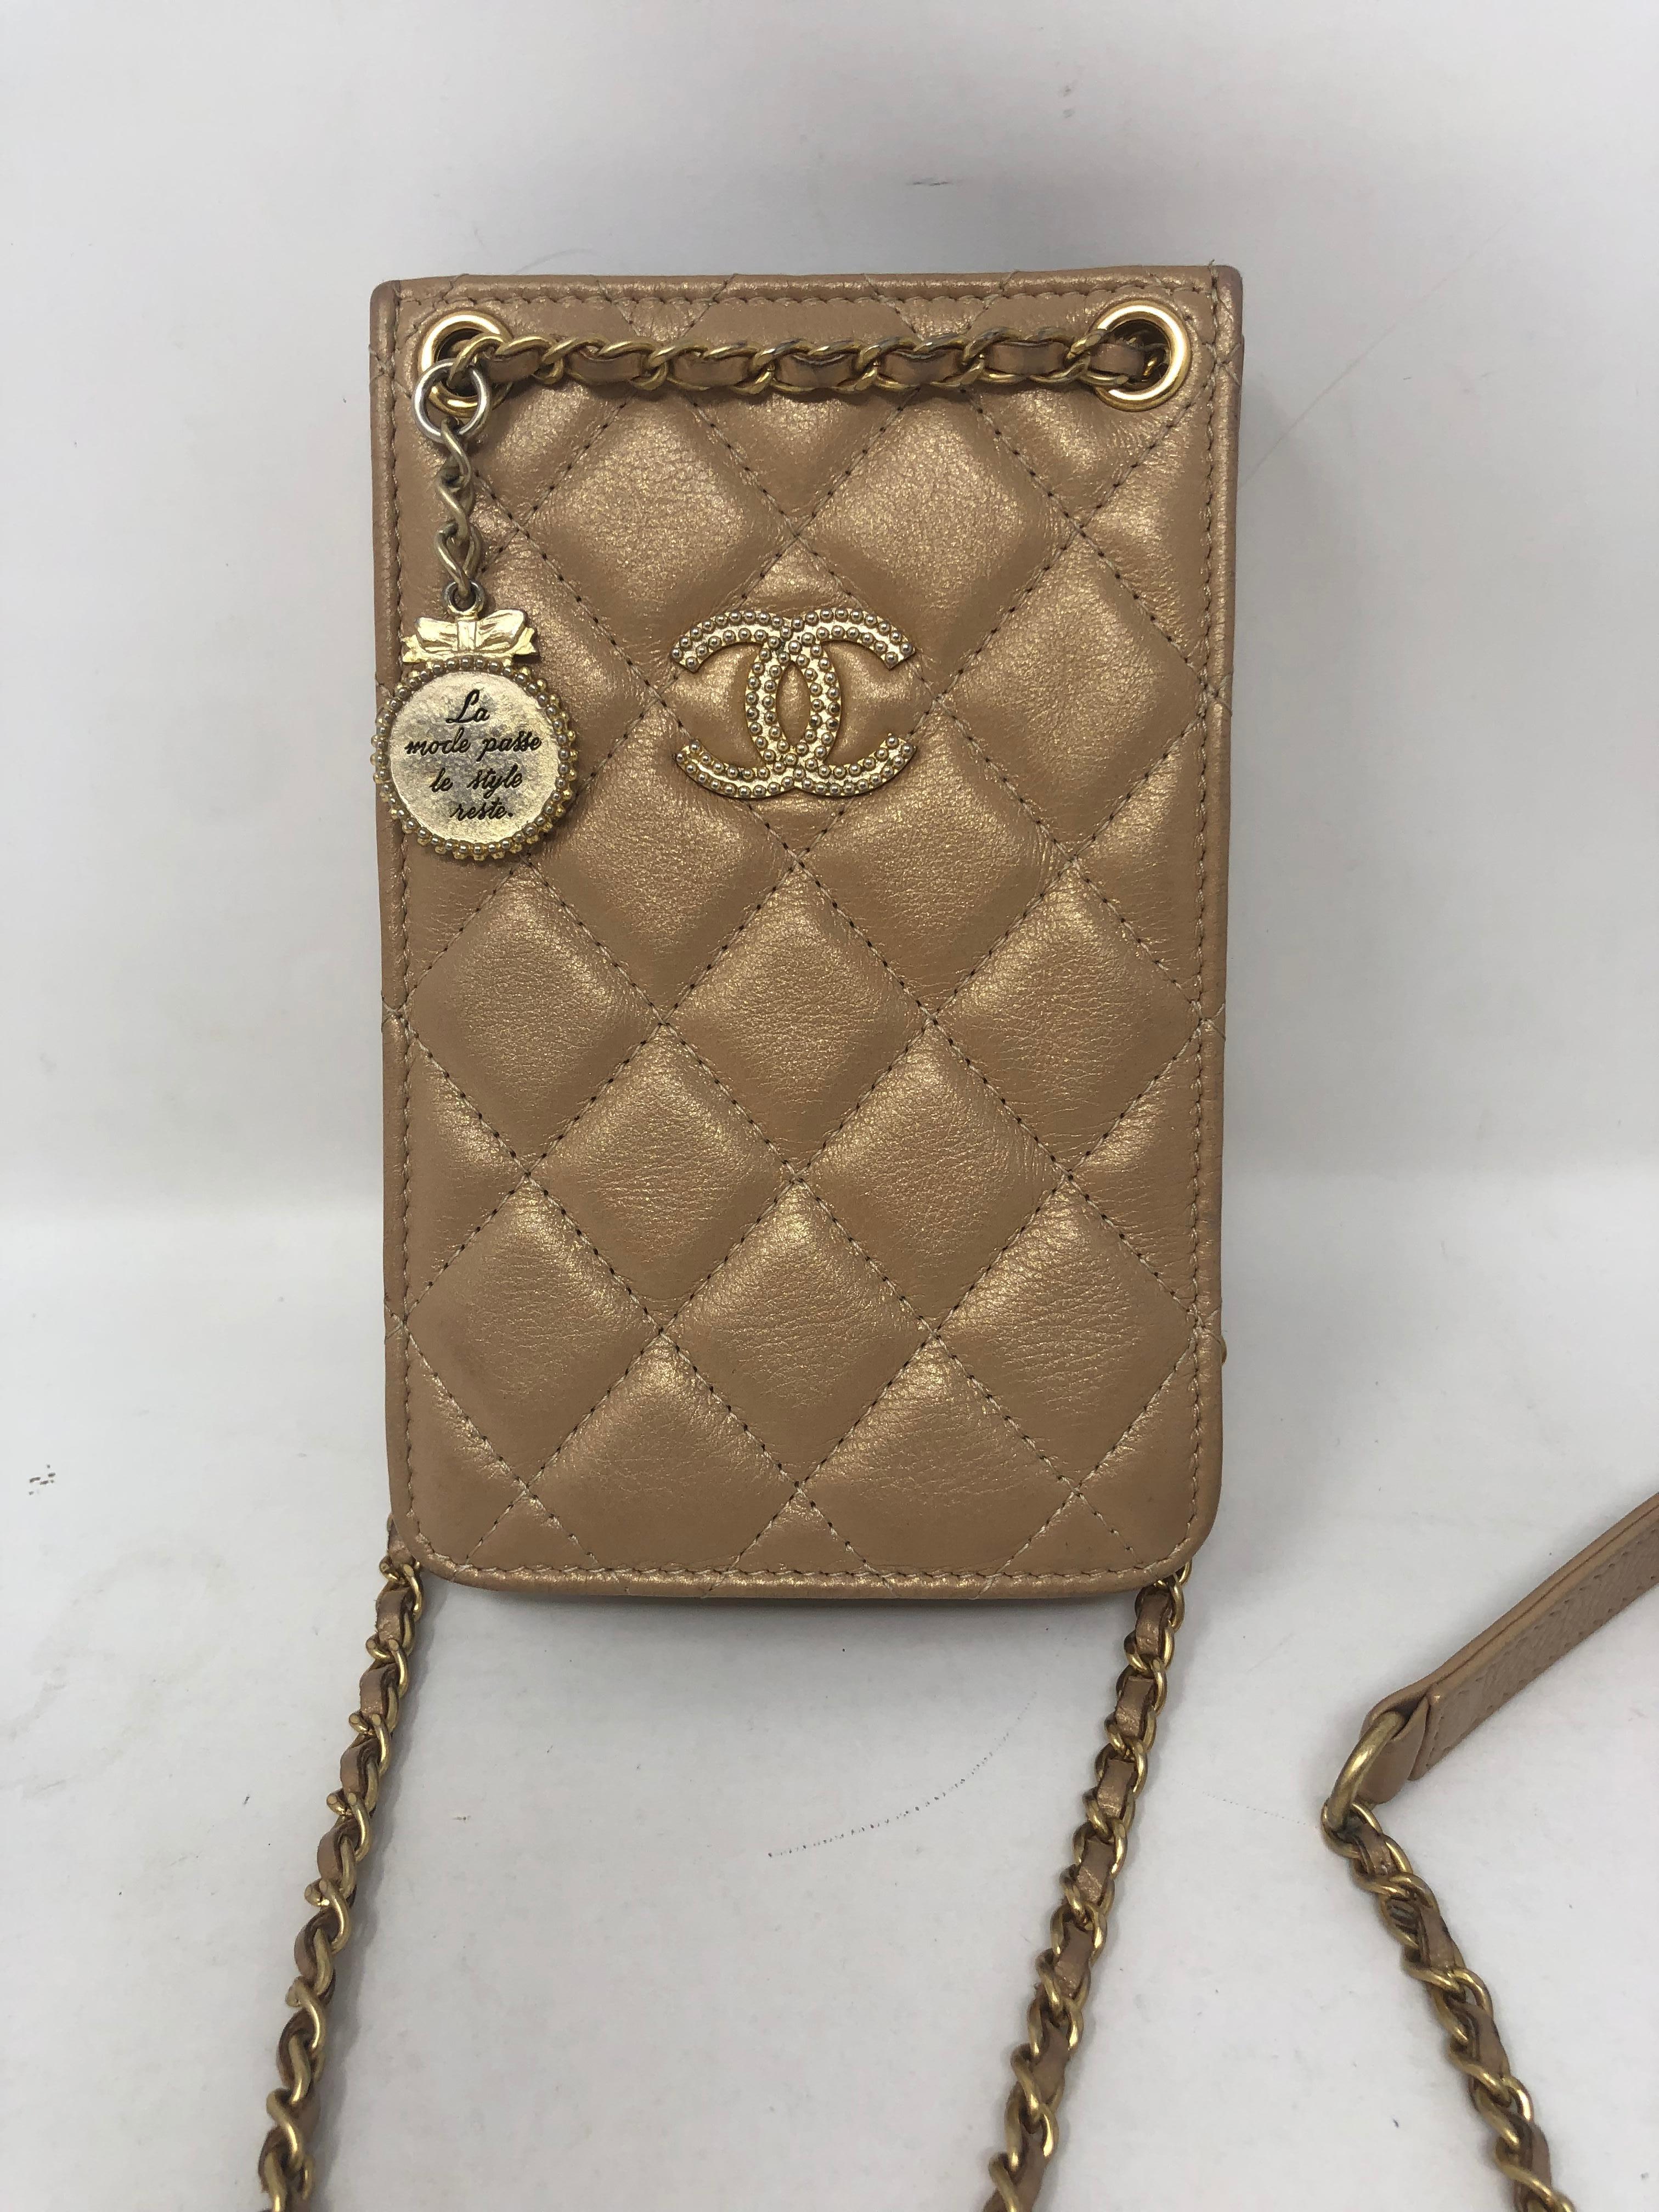 Chanel Gold Phone Holder Crossbody Bag. Gold leather with gold hardware. Can fit Iphone easily for it's size should be stadium approved. Mint condition. Ready to be worn.Guaranteed authentic. 